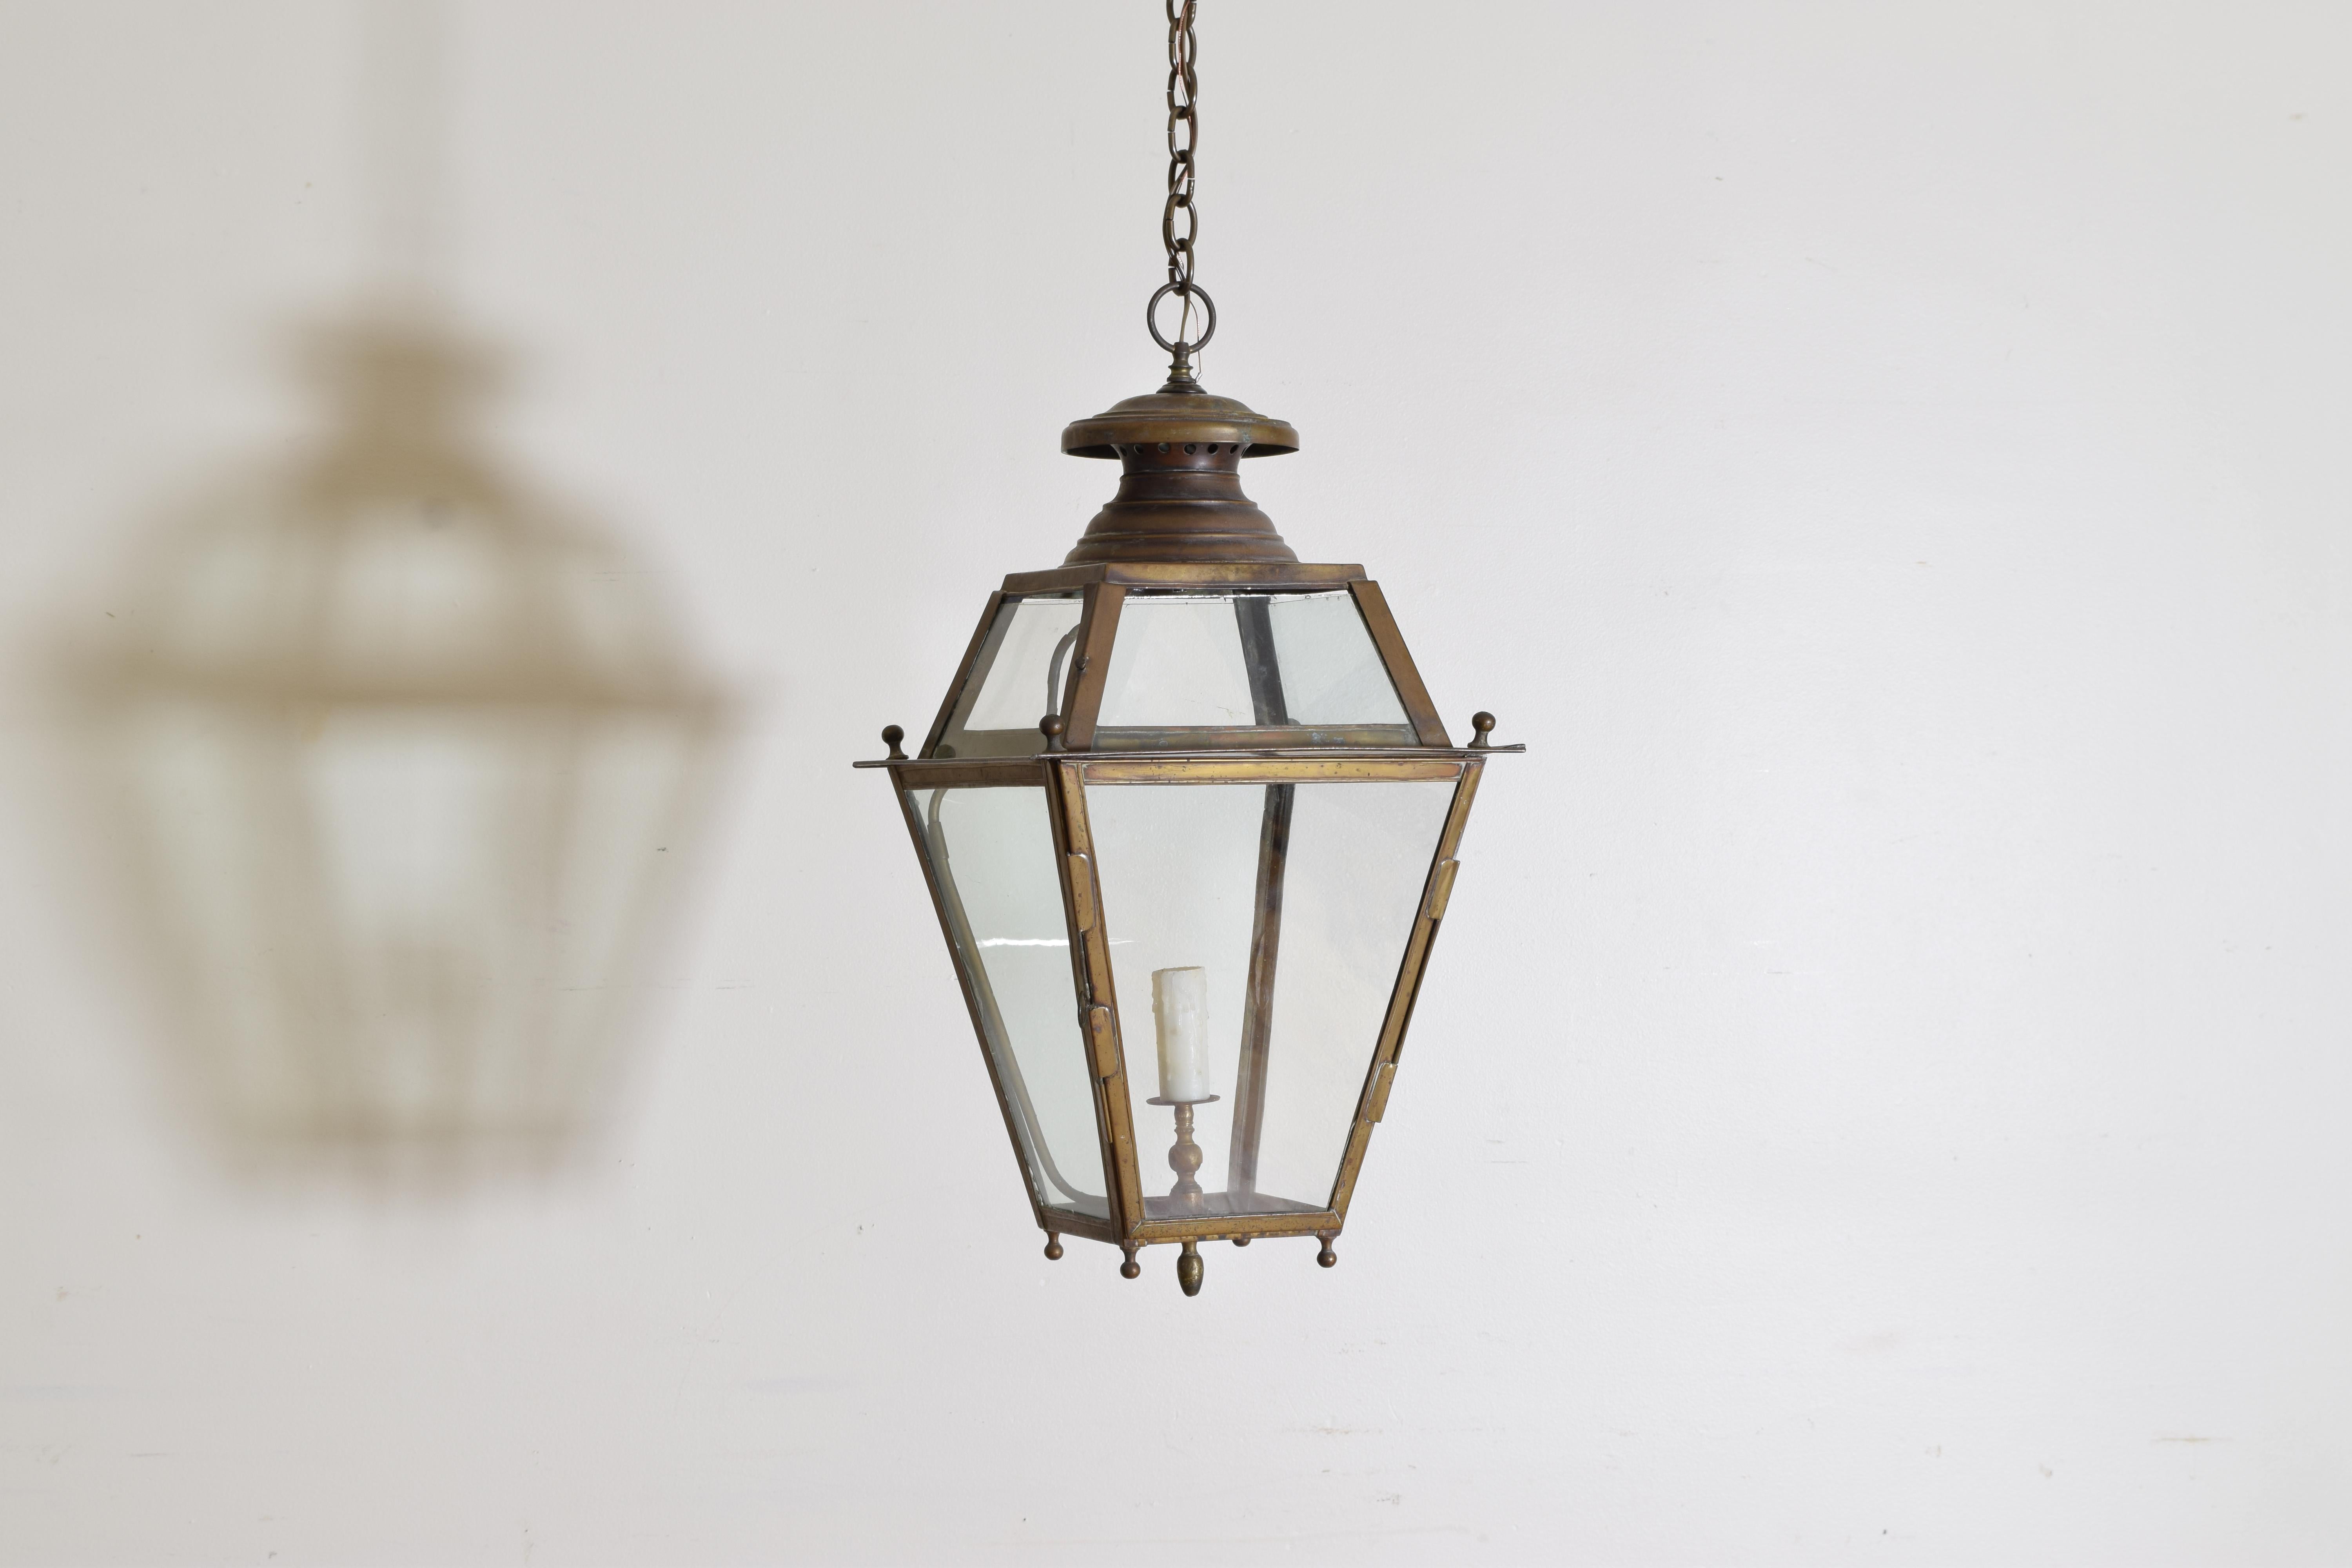 This four sided tapering brass lantern has 8 glass inserts and a shaped top with large finial, retaining its original gas line and spigot but now electrified, the bottom with small brass feet and a central terminal.